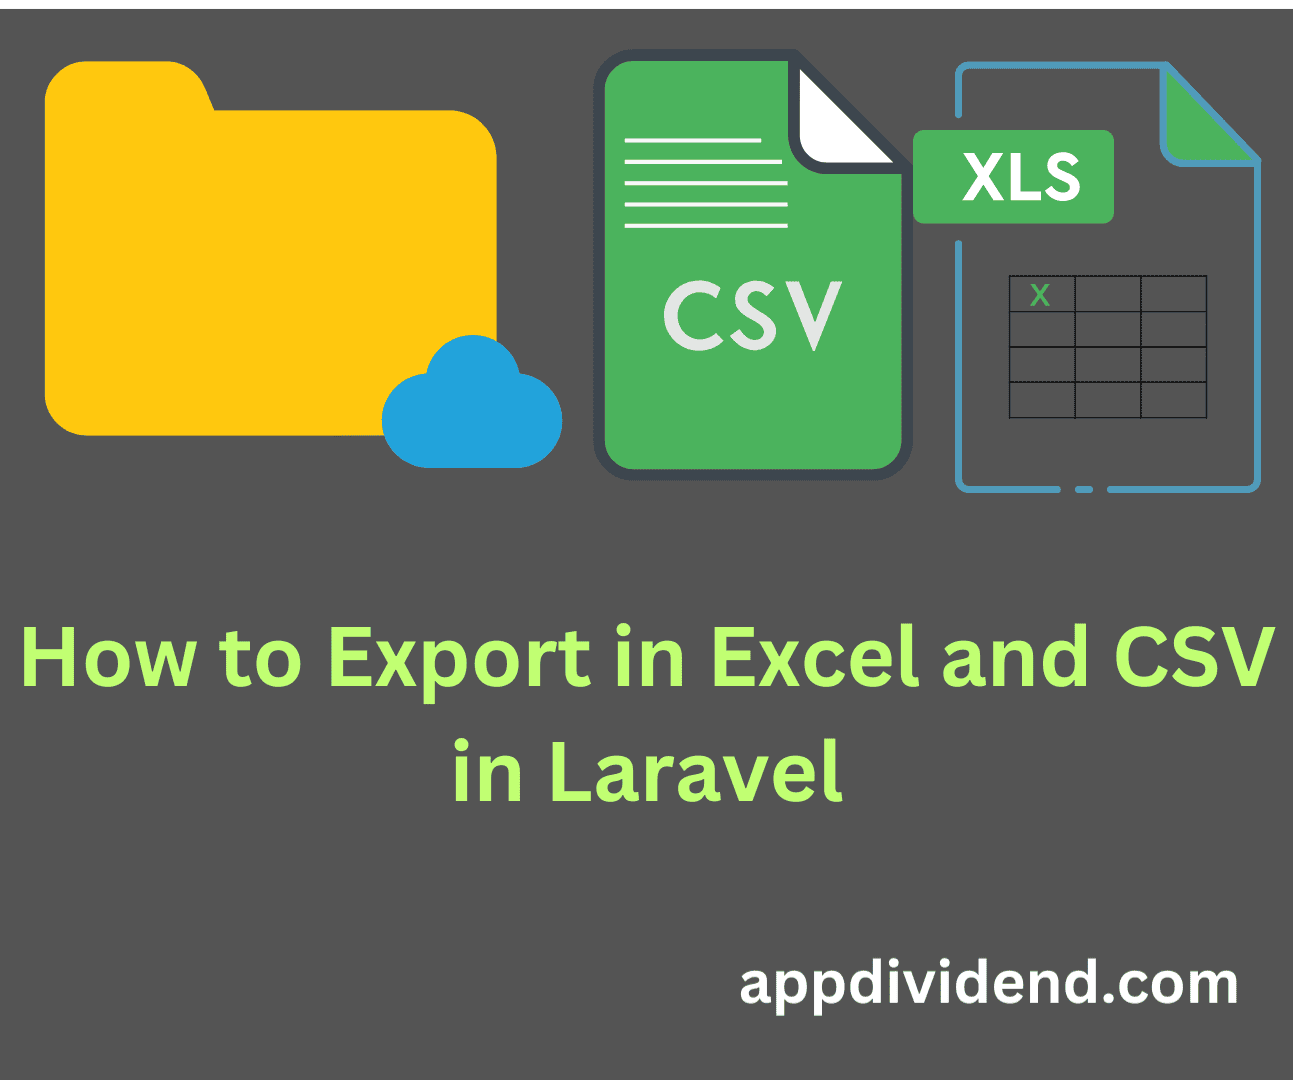 How to Export in Excel and CSV in Laravel